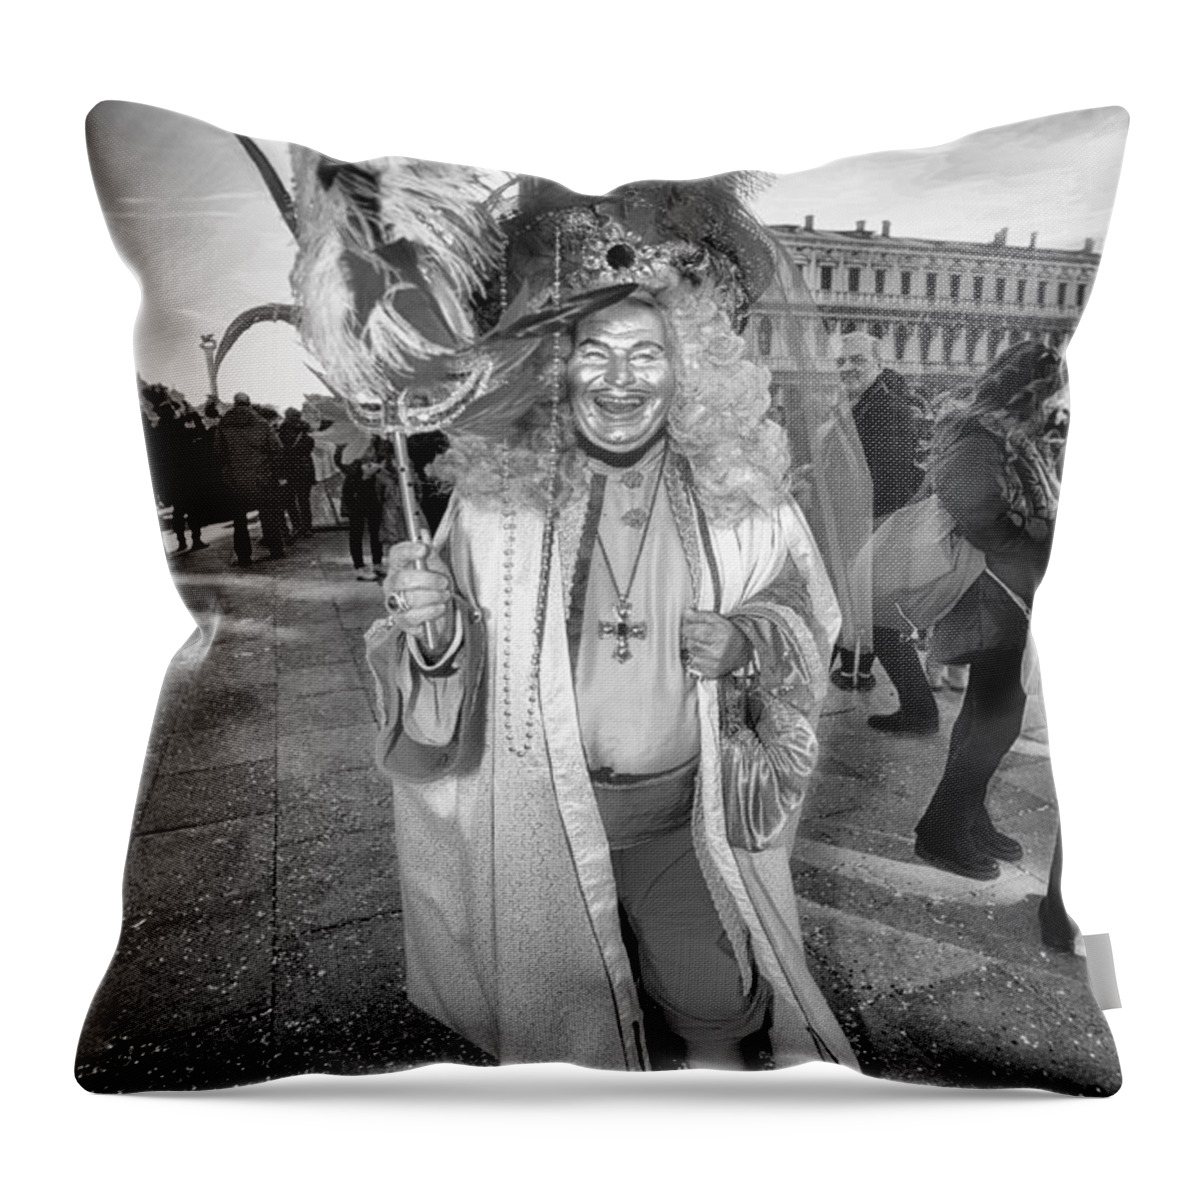 2 0 1 6 Throw Pillow featuring the photograph A Feathered Casanova by Jack Torcello